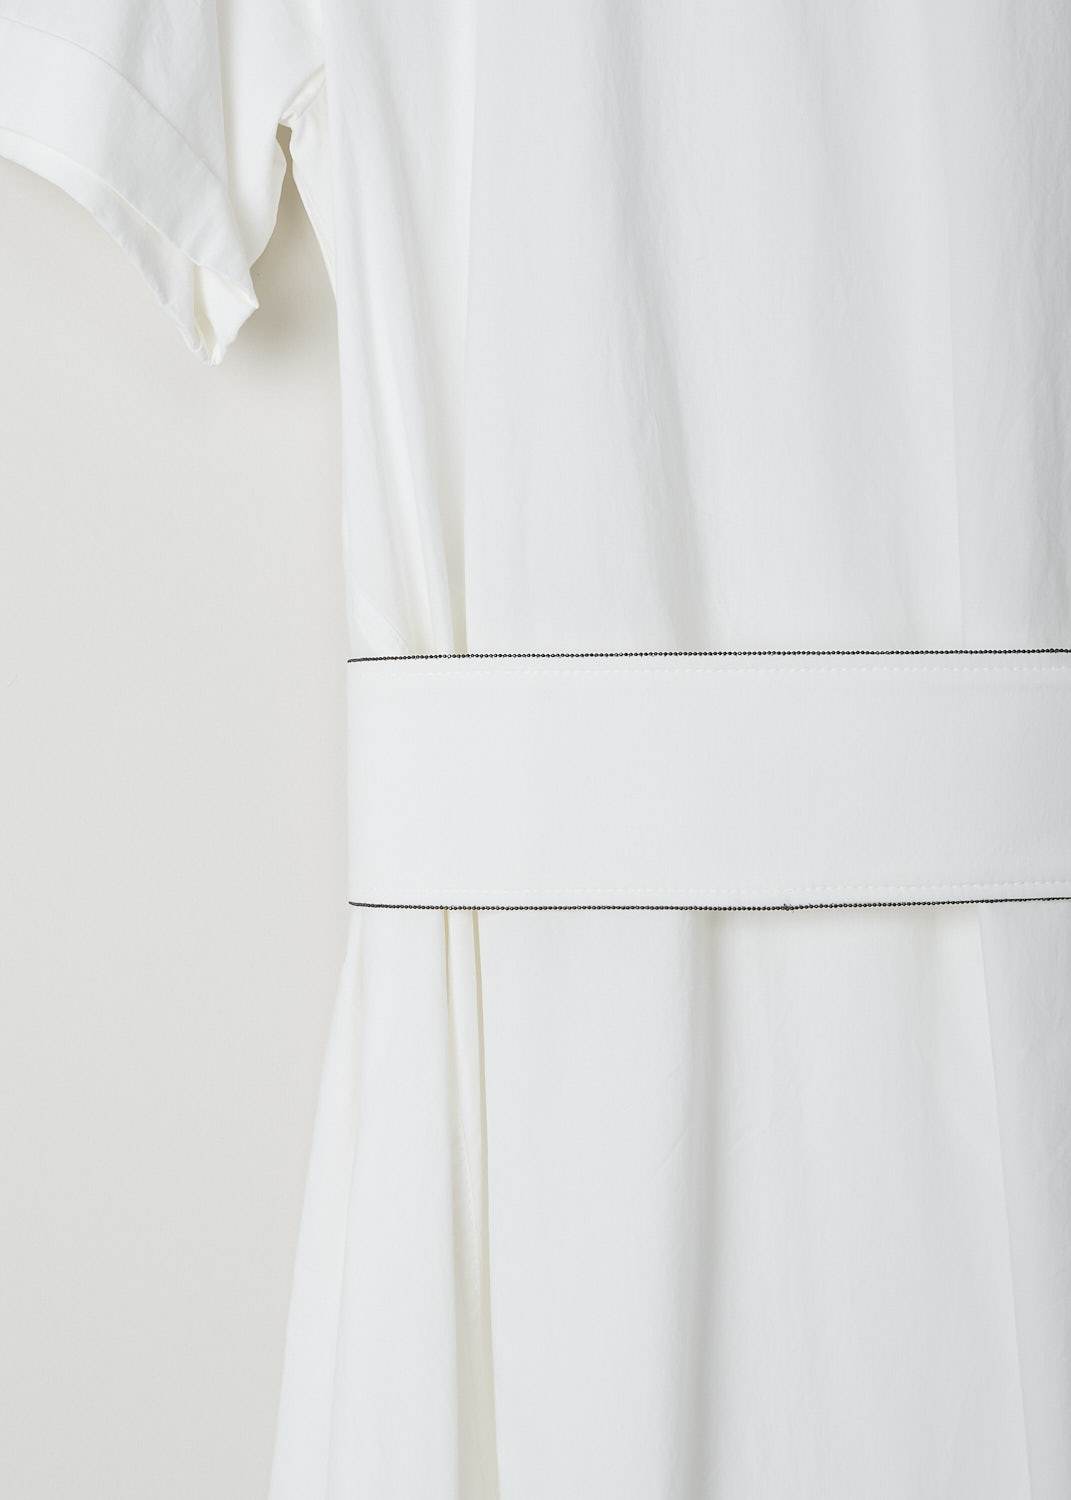 BRUNELLO CUCINELLI, WHITE MIDI DRESS WITH A HIGH-LOW SKIRT, MH127A4534_C600, White, Detail, This white midi dress has a round neckline and short sleeves with folded cuffs. The dress has a flared high-low skirt, meaning the hemline is shorter at the front and longer at the back. The broad fabric belt has a contrasting black monili trim and a D-ring belt buckle. The dress comes with a detachable underskirt with a broad elasticated waistband. The underskirt is attached with two buttons. In the back, a concealed centre zip functions as the closure option. 
